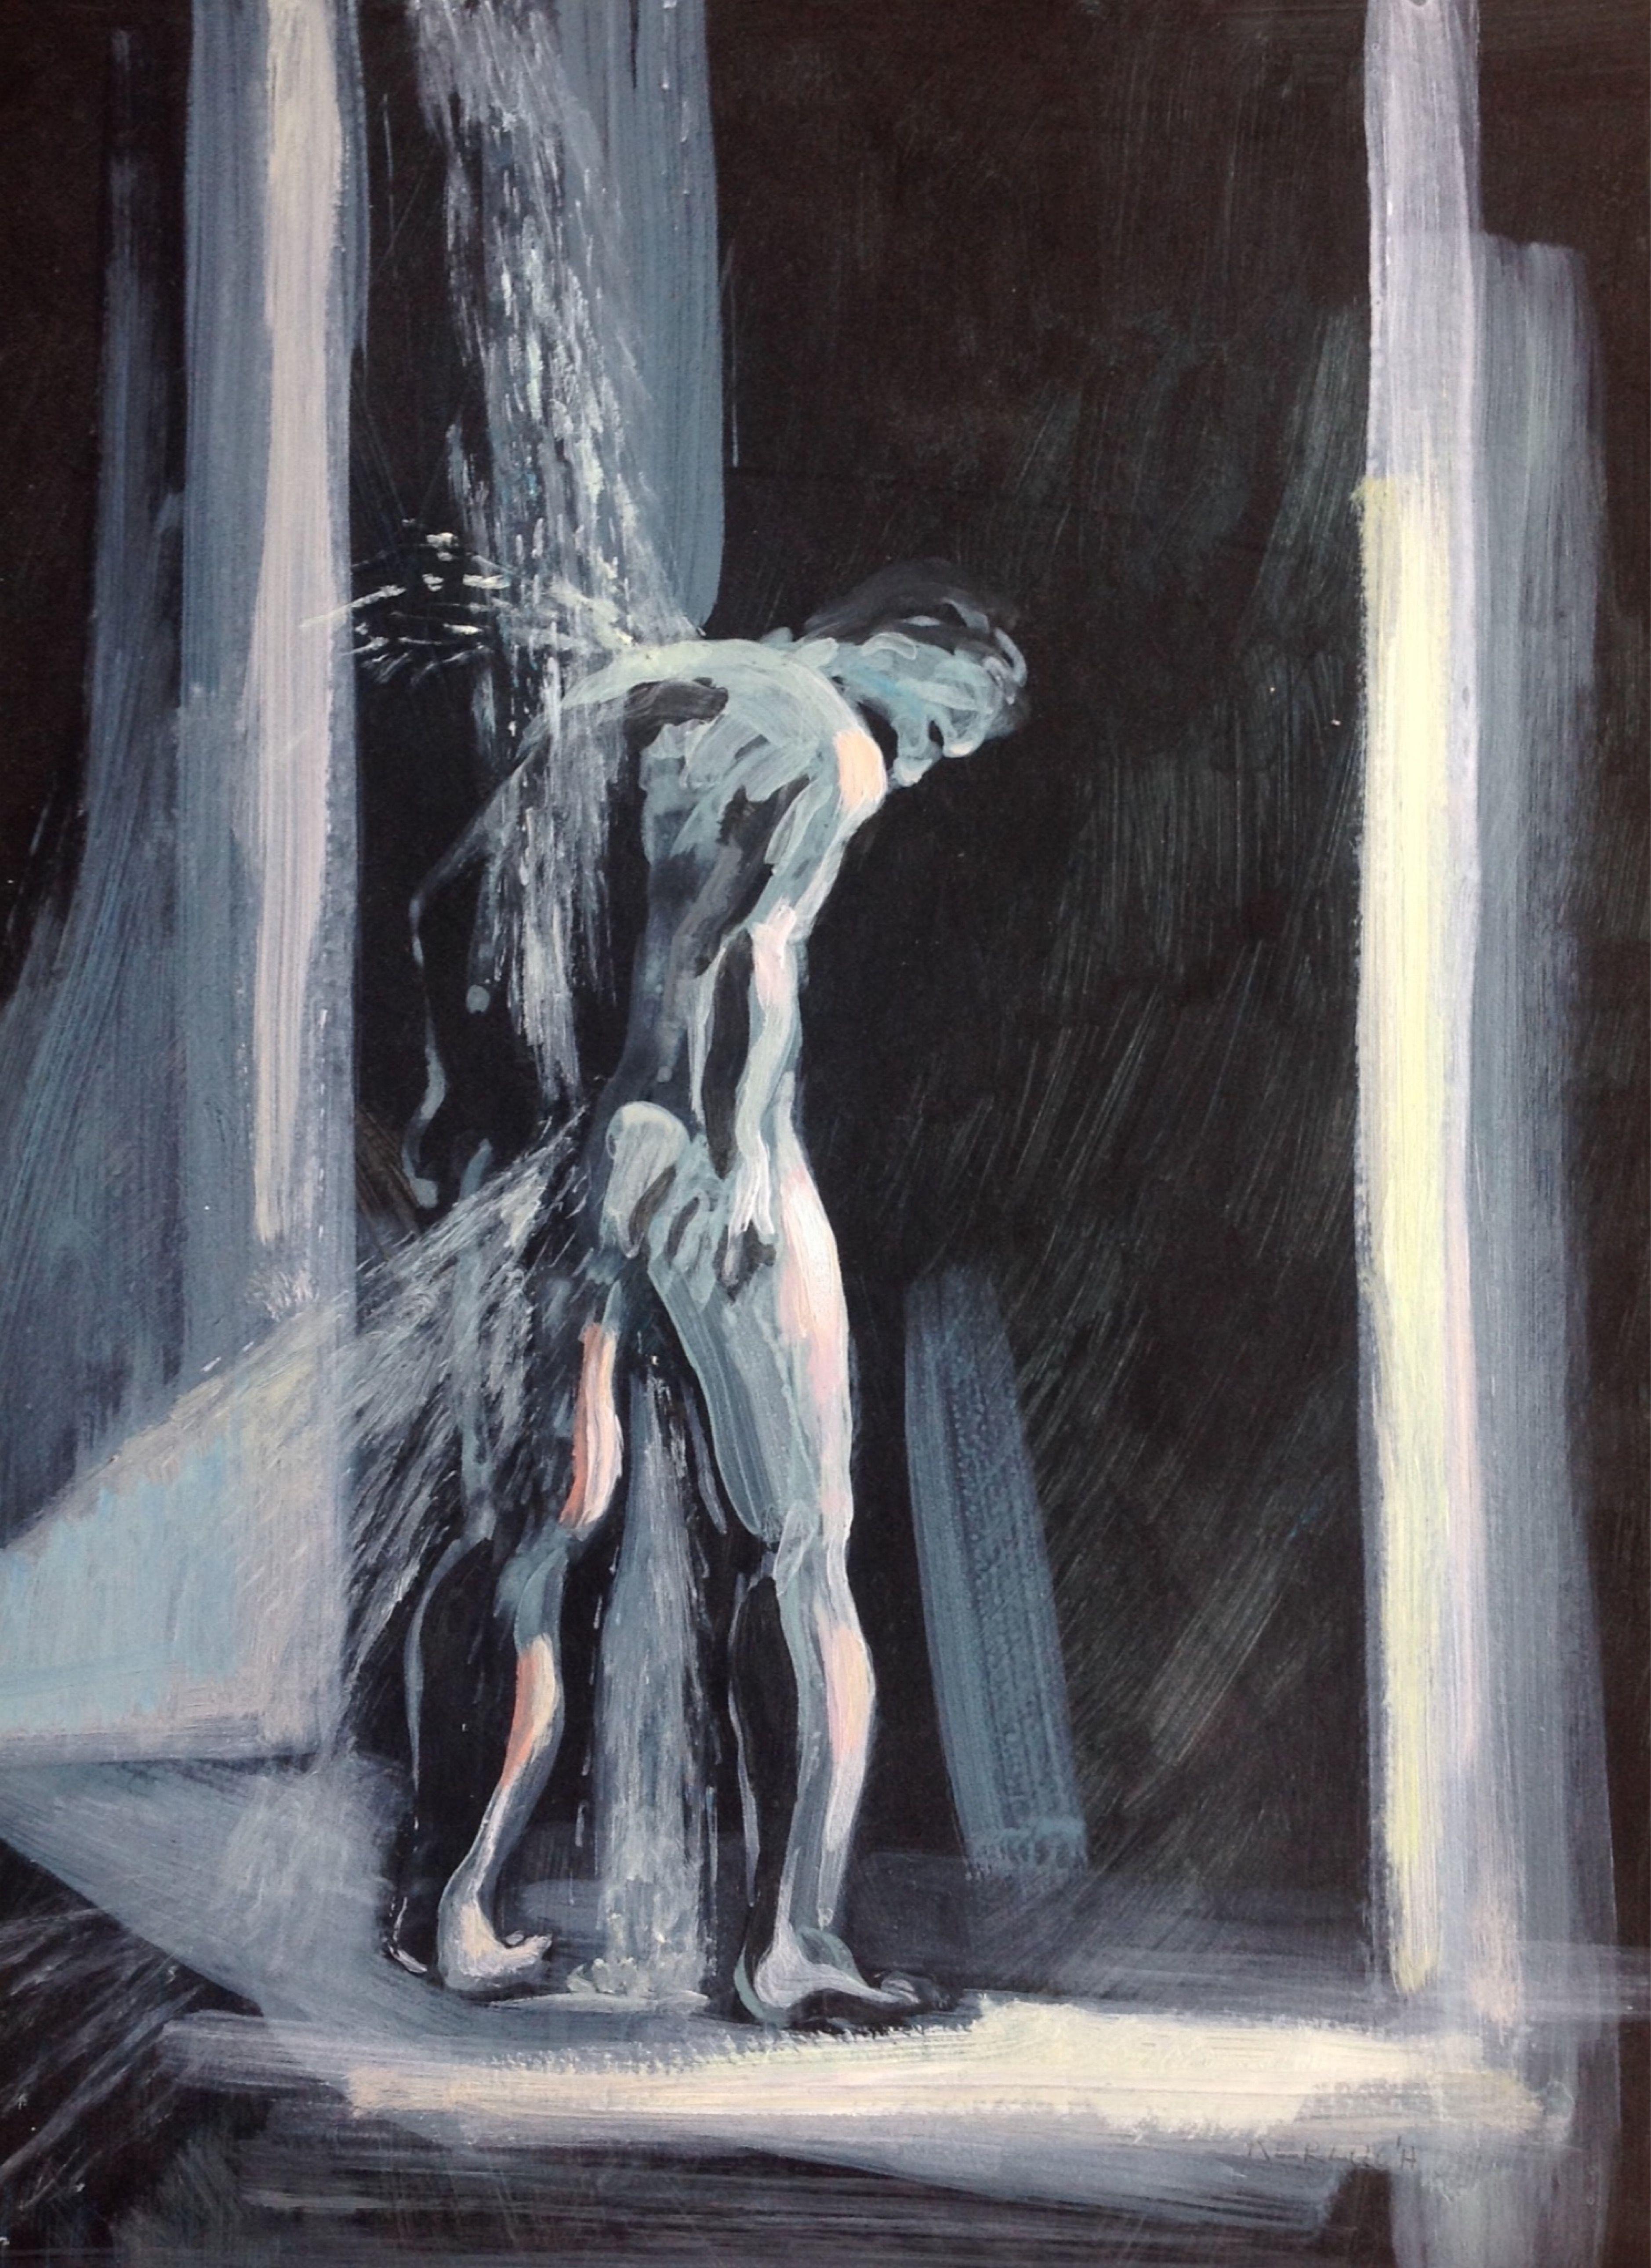 Acrylic work on archival quality paper depicting a man taking a shower at night.  A faint light coming from an adjacent room. Done with the alla prima technique.  The work would be varnished befoe being sent packed in a box. :: Painting ::